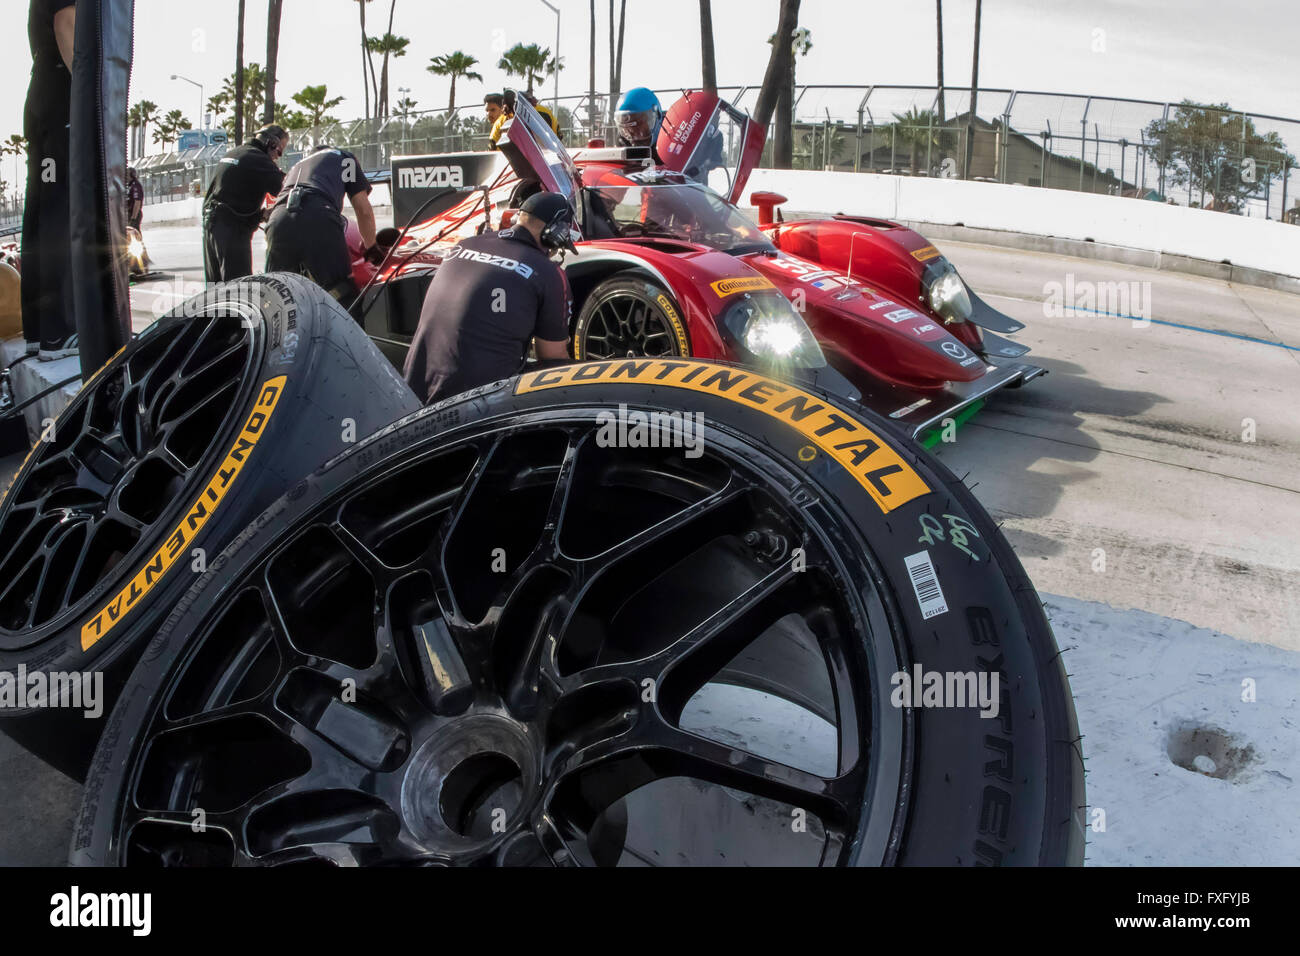 Long Beach, CA, USA. 15th Apr, 2016. Long Beach, CA - Apr 15, 2016: The SpeedSource Mazda pits during a practice session at the Toyota Grand Prix of Long Beach at Streets of Long Beach in Long Beach, CA. Credit:  csm/Alamy Live News Stock Photo